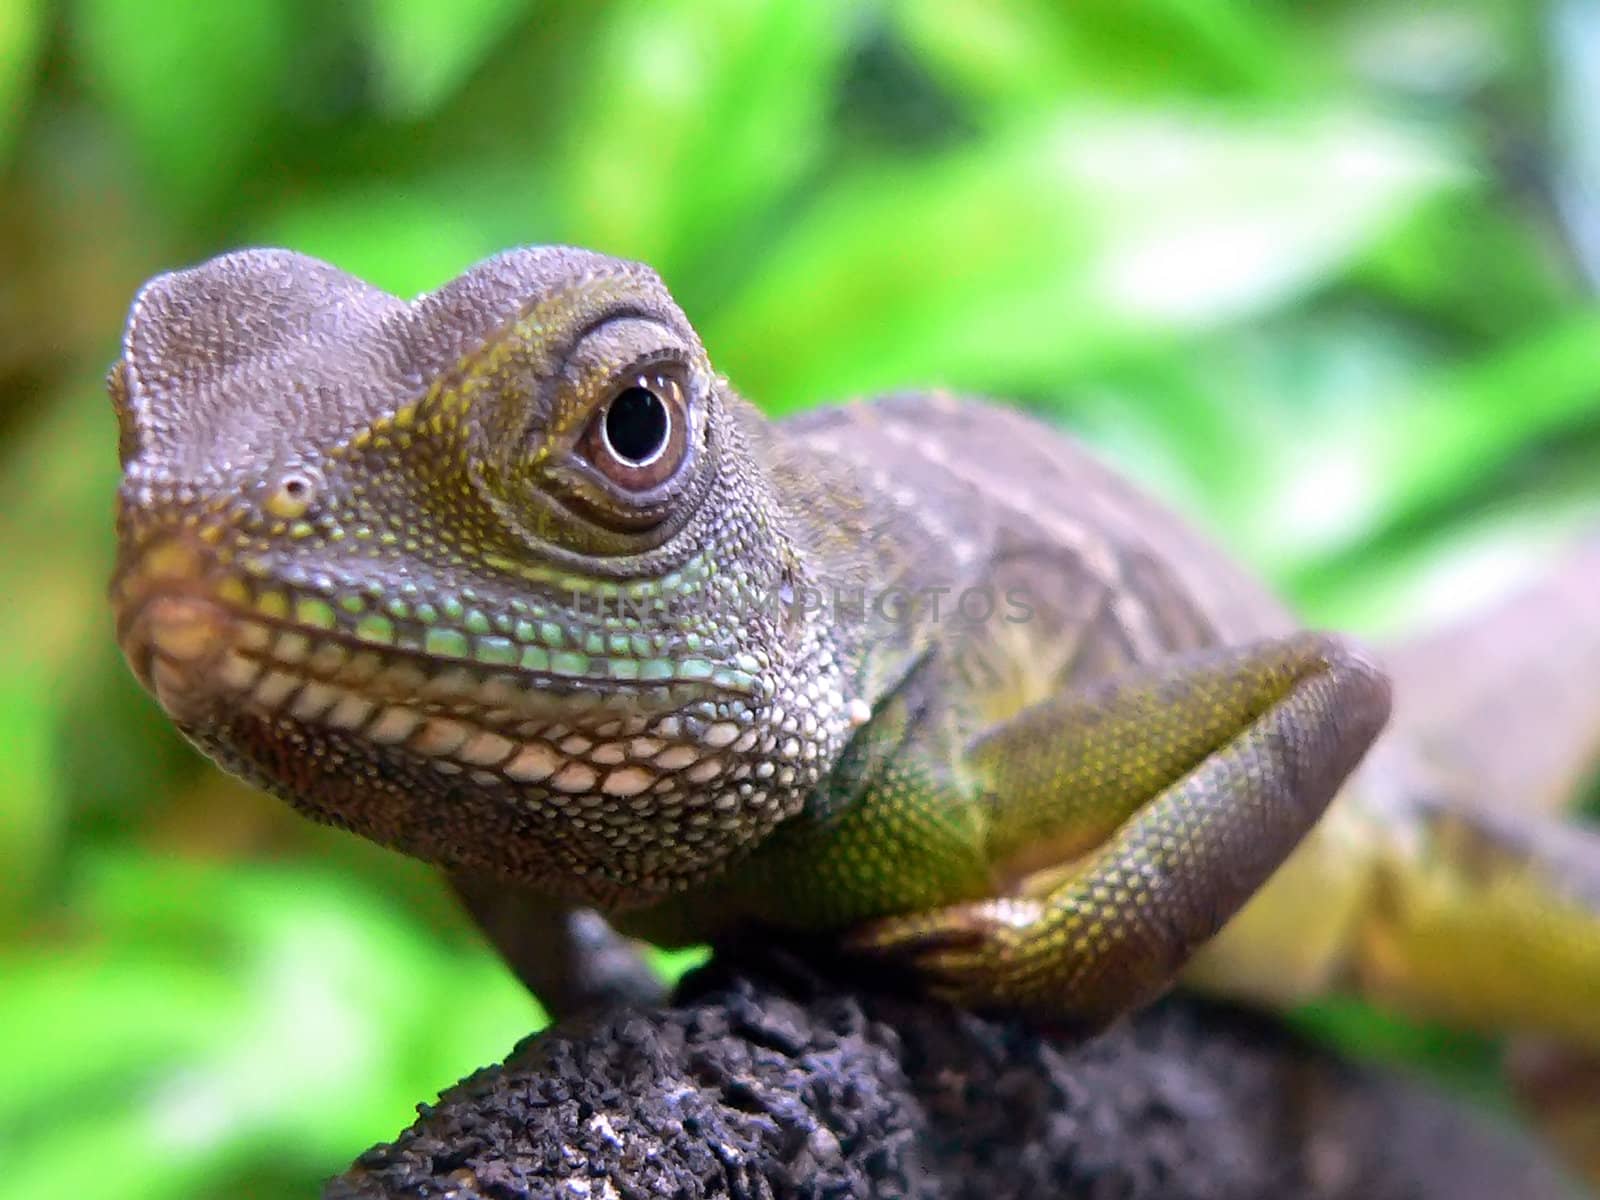 Close-up picture of a Water Dragon (Physignathus cocincinus)